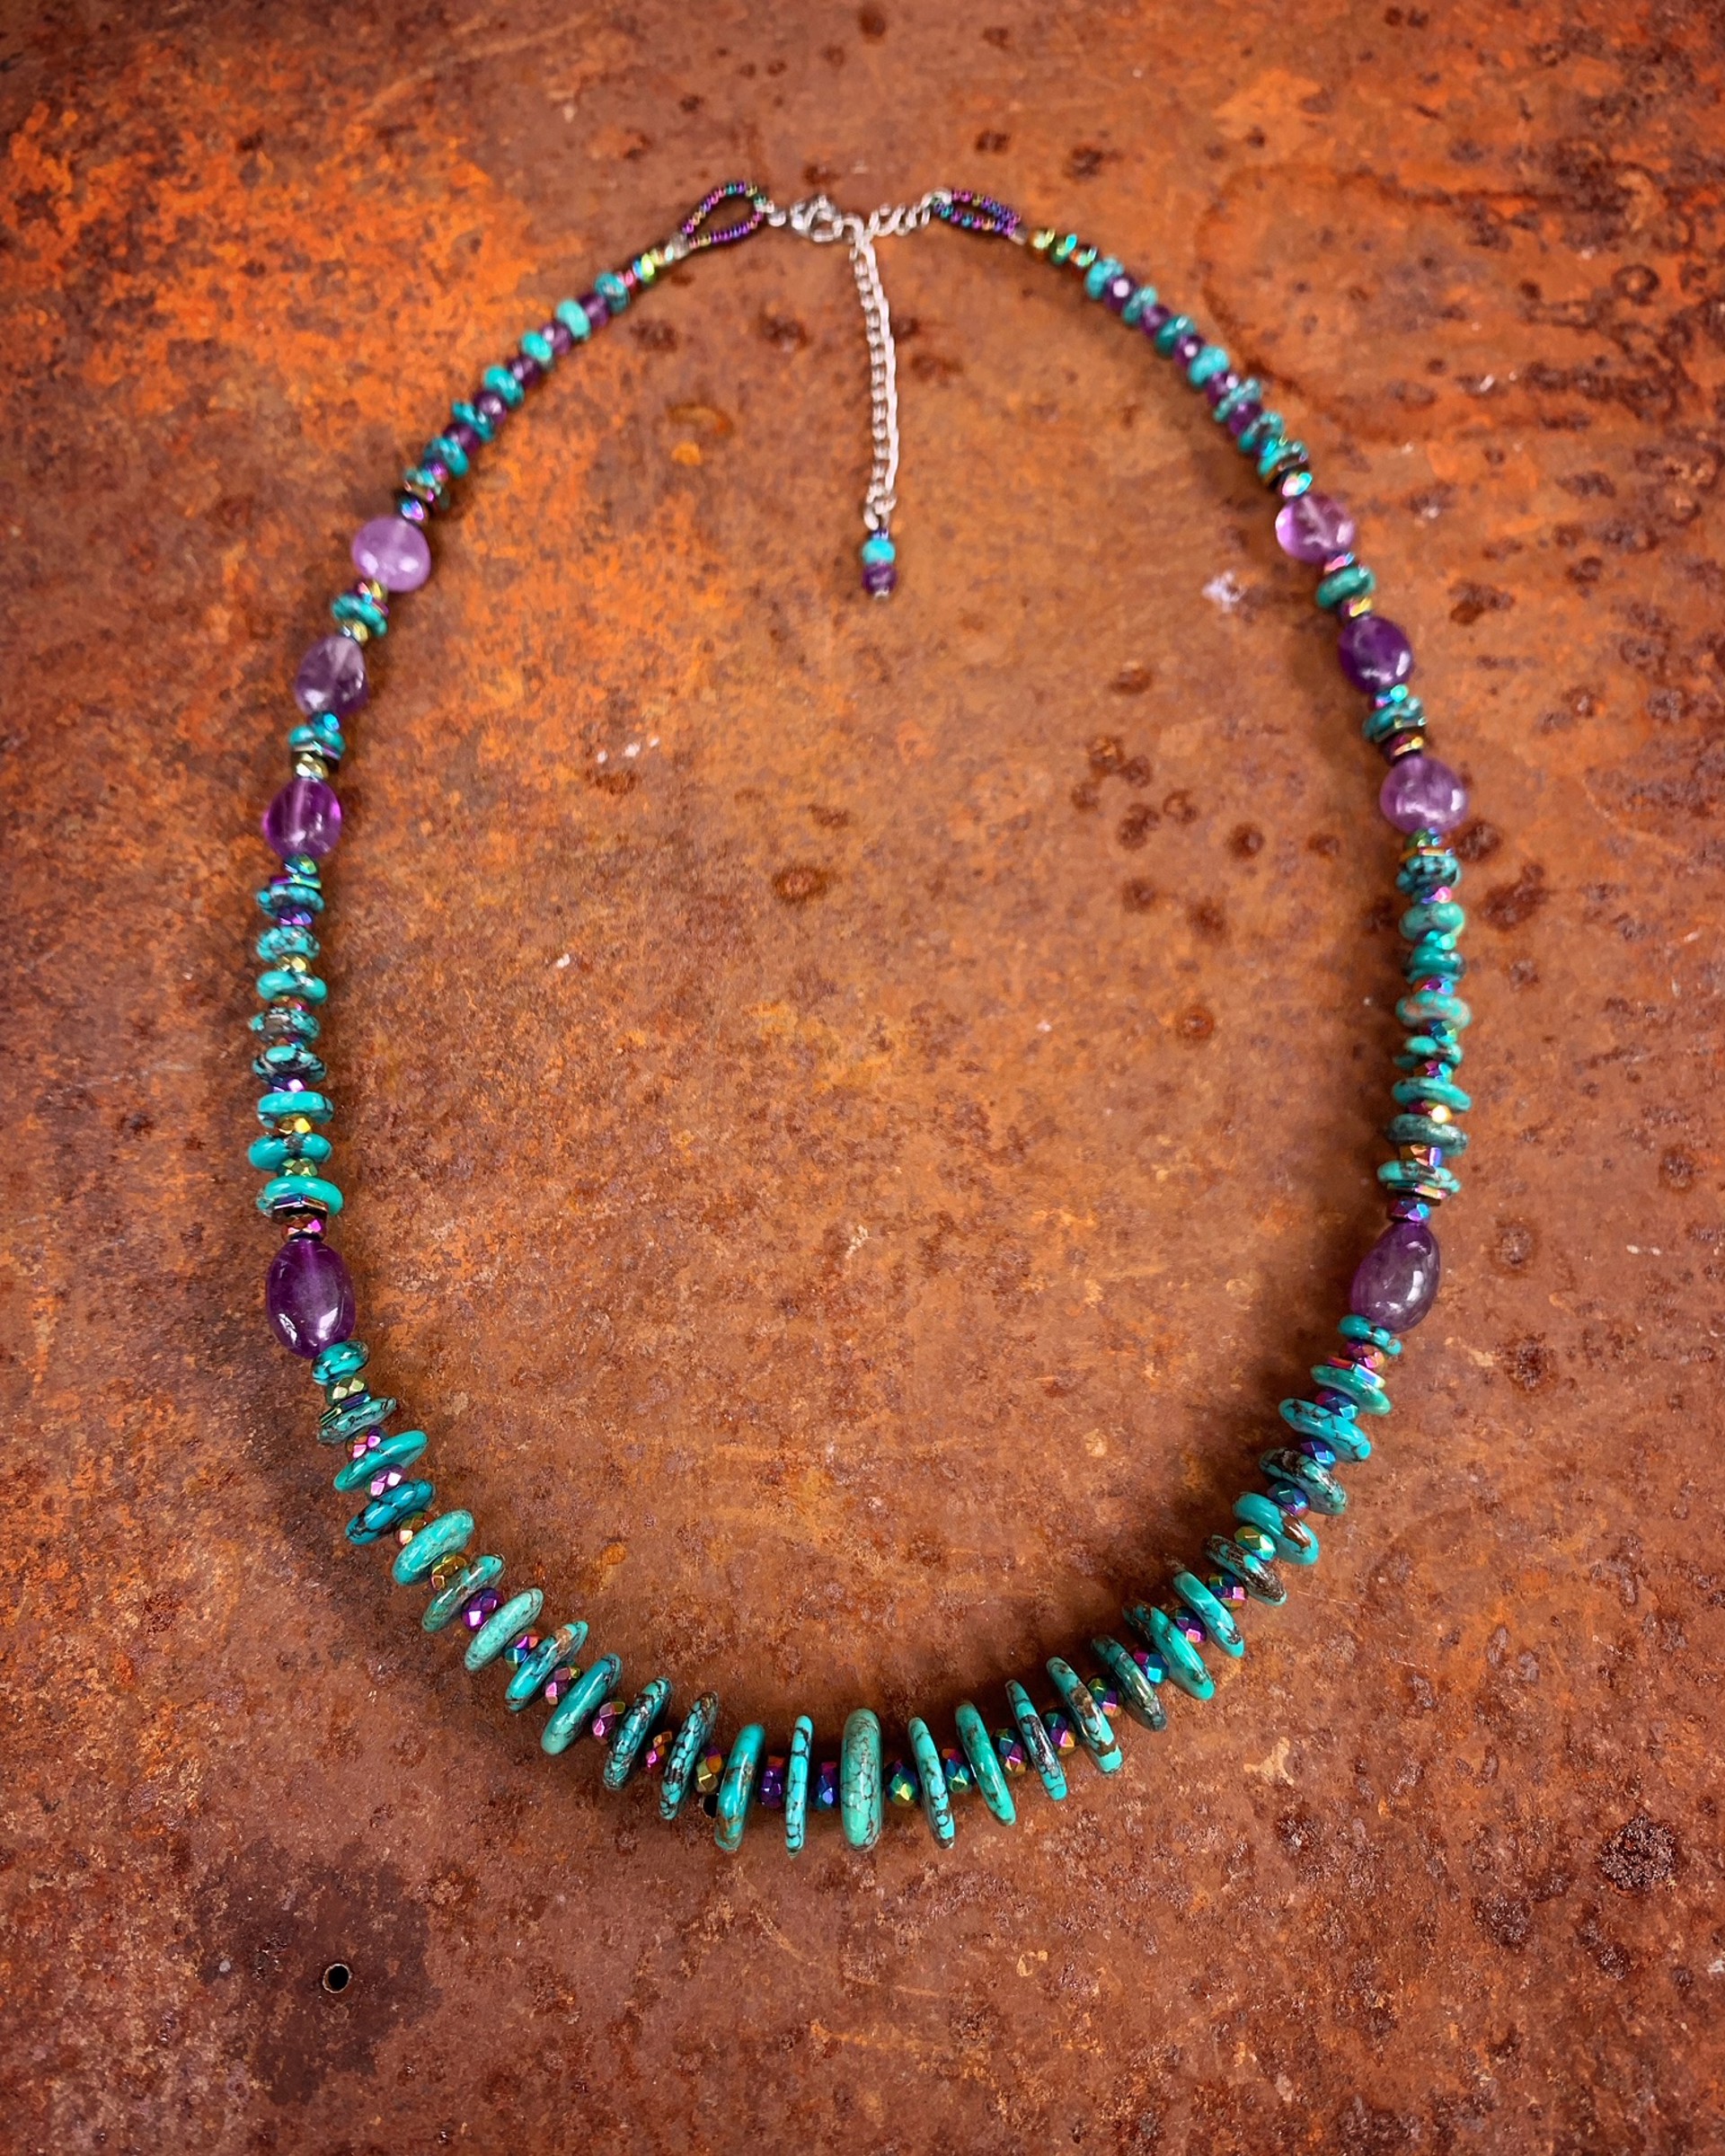 K839 Turquoise and Amethyst Necklace by Kelly Ormsby